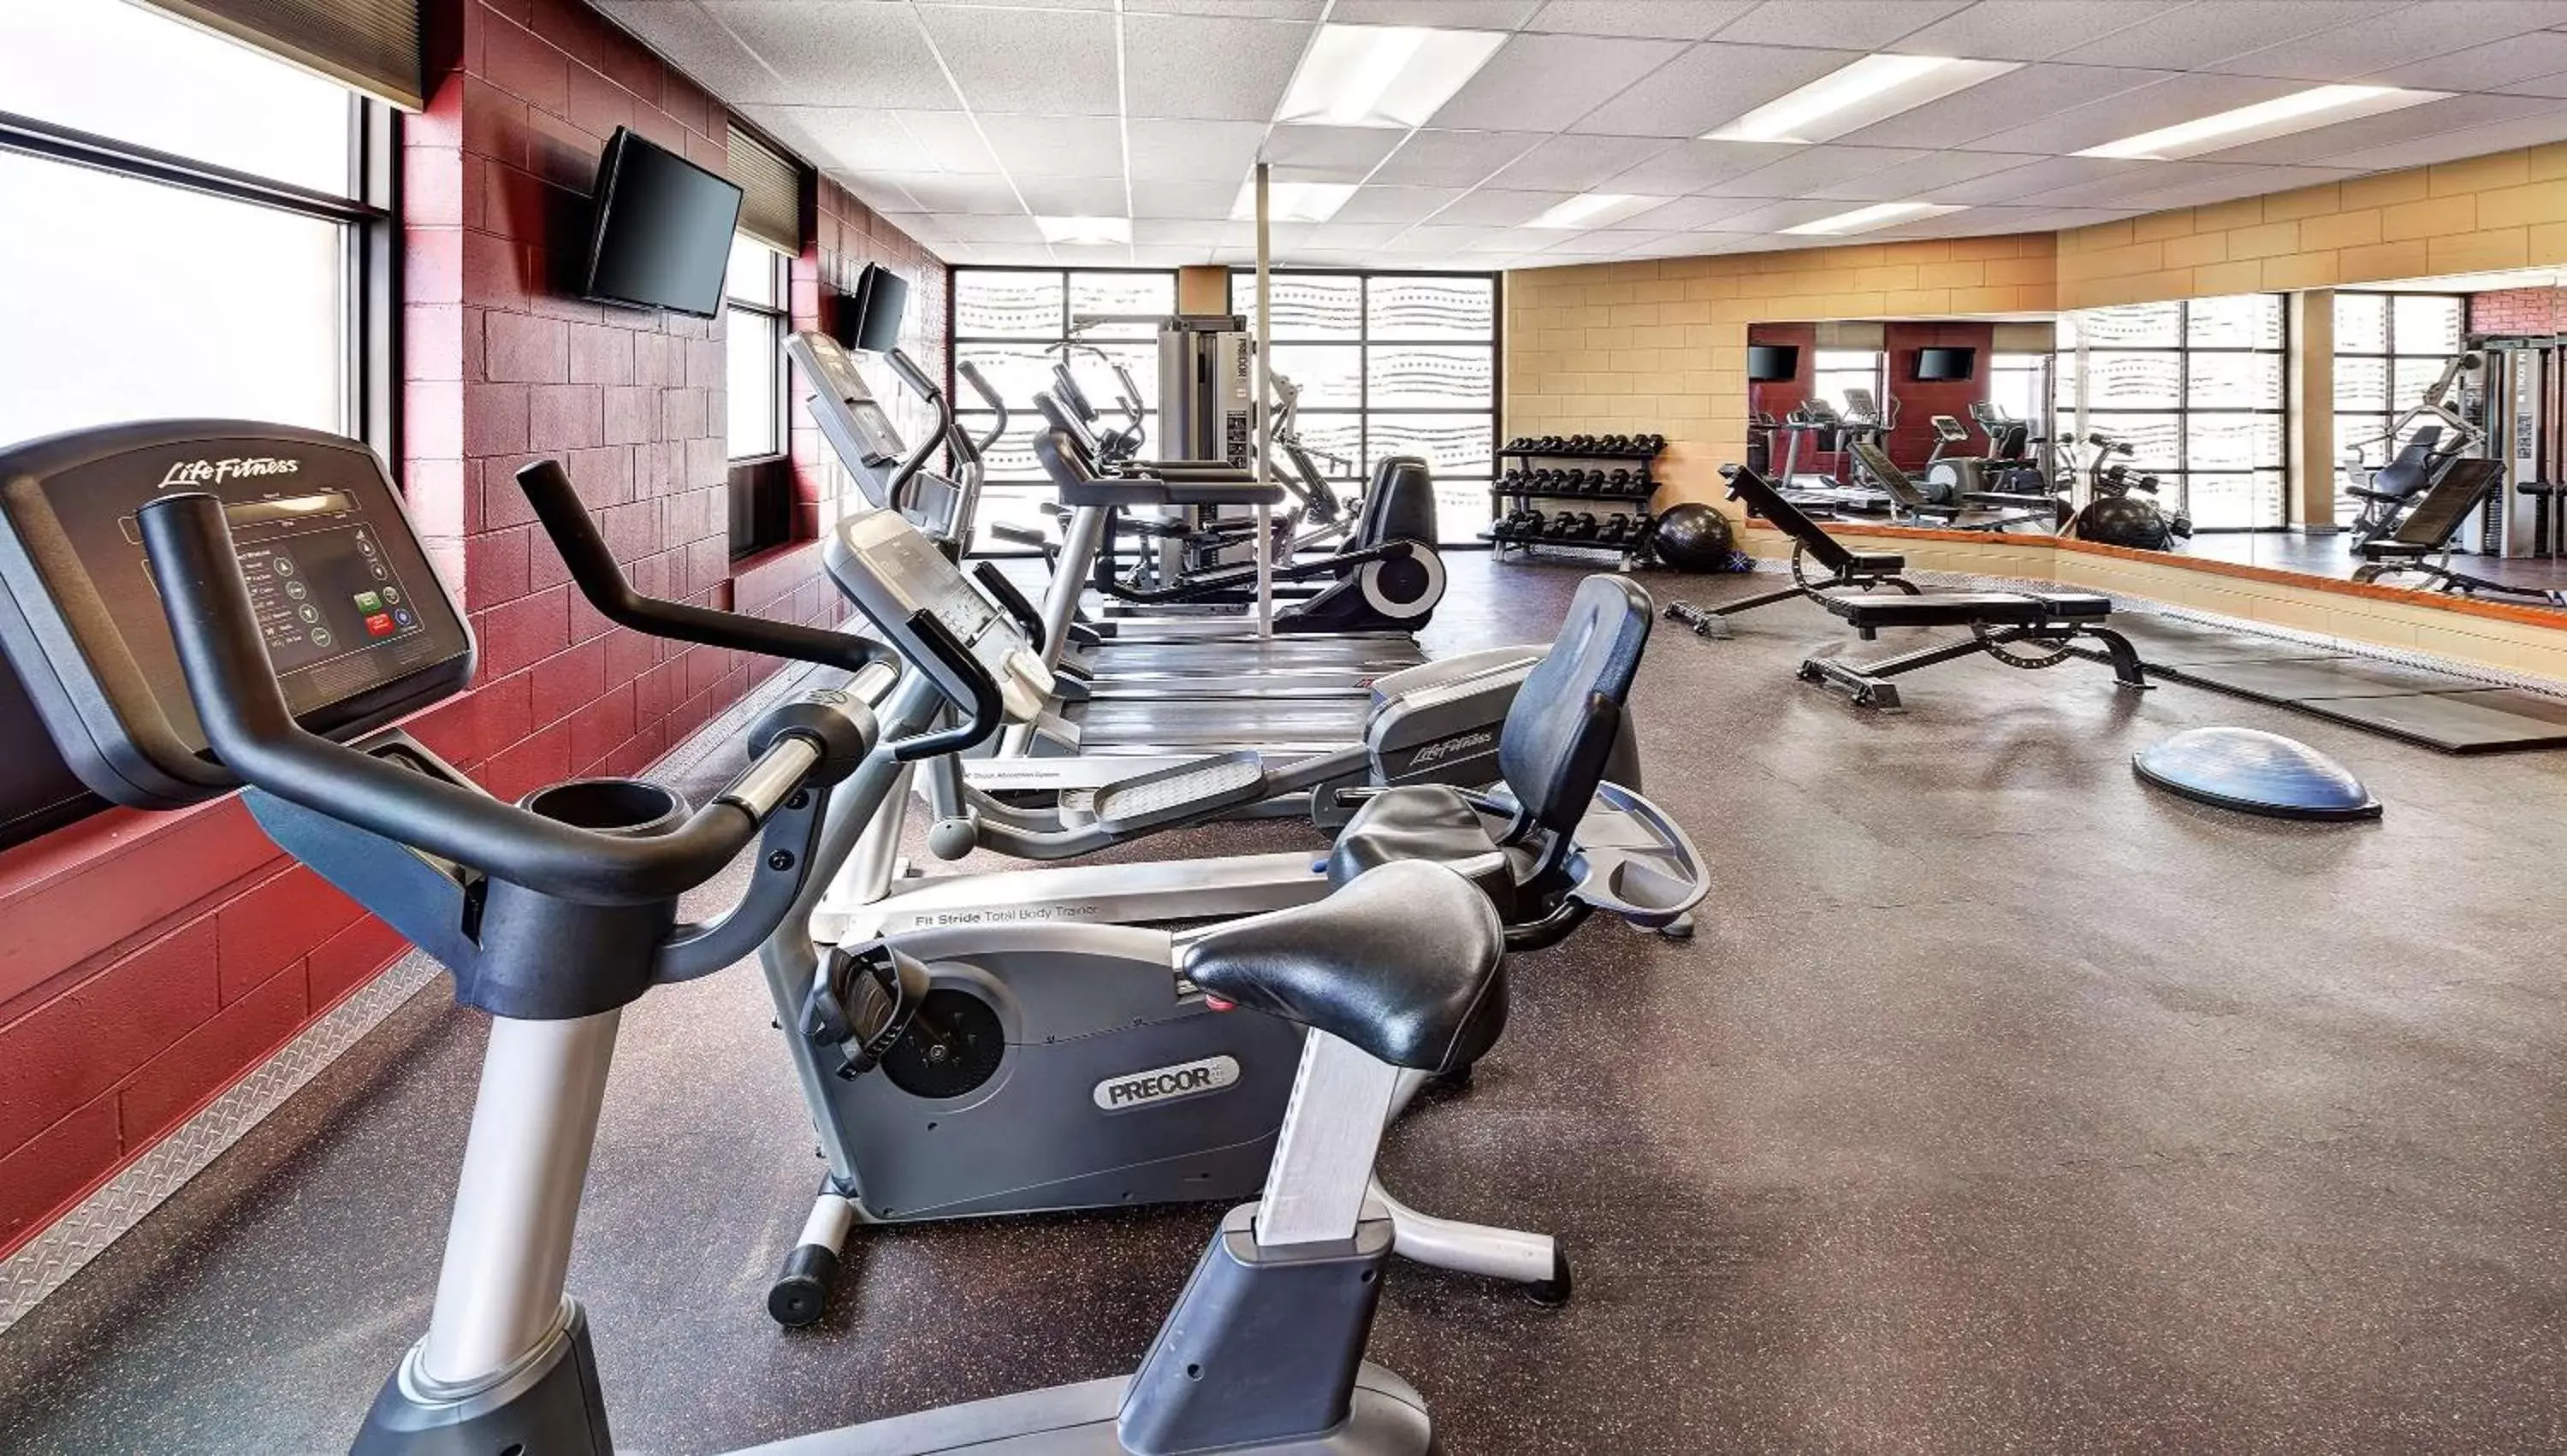 Fitness centre/facilities in The Water Tower Inn - BW Premier Collection